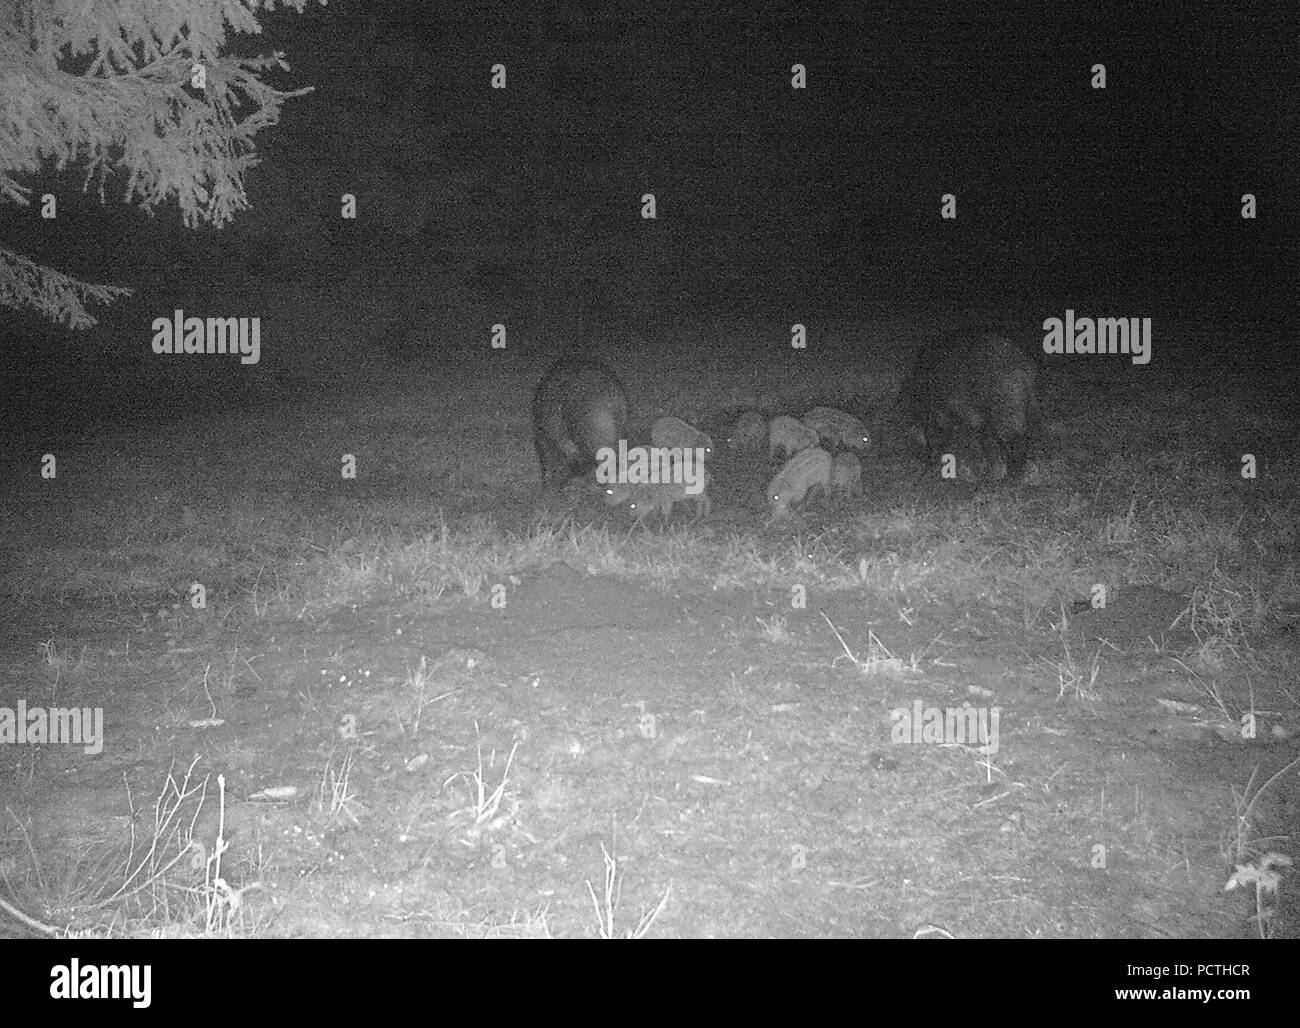 Wild boars with young animals in the nightly forest, Hochsauerland, Sauerland, North Rhine-Westphalia, Germany Stock Photo